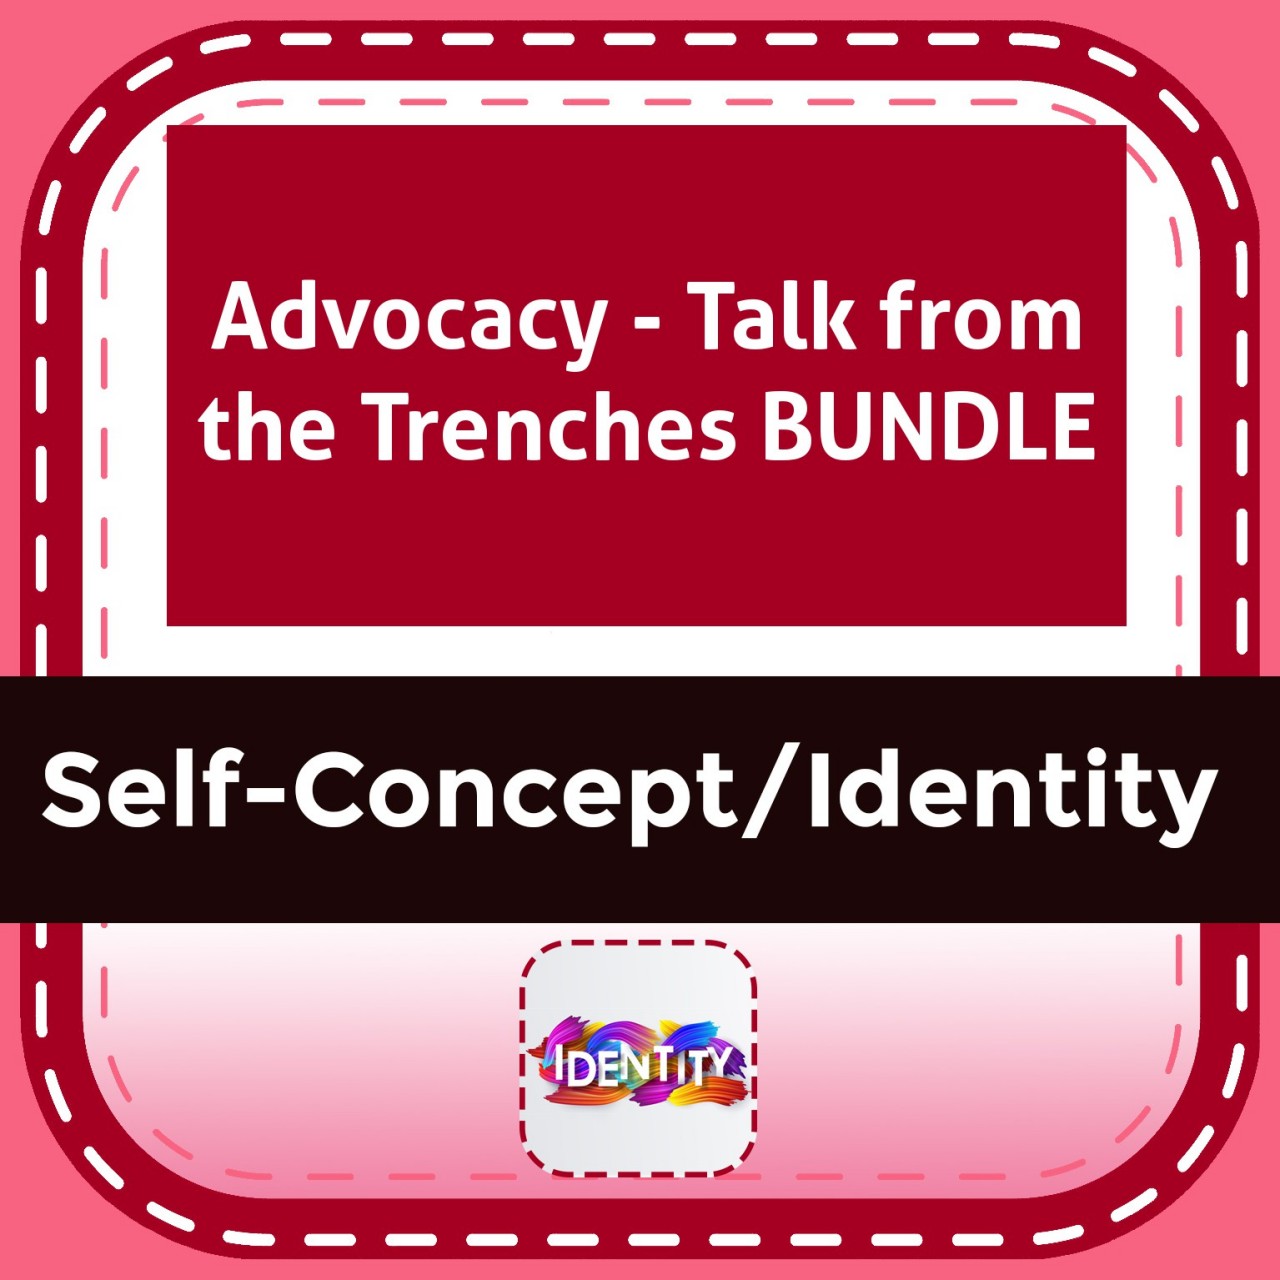 Advocacy - Talk from the Trenches BUNDLE